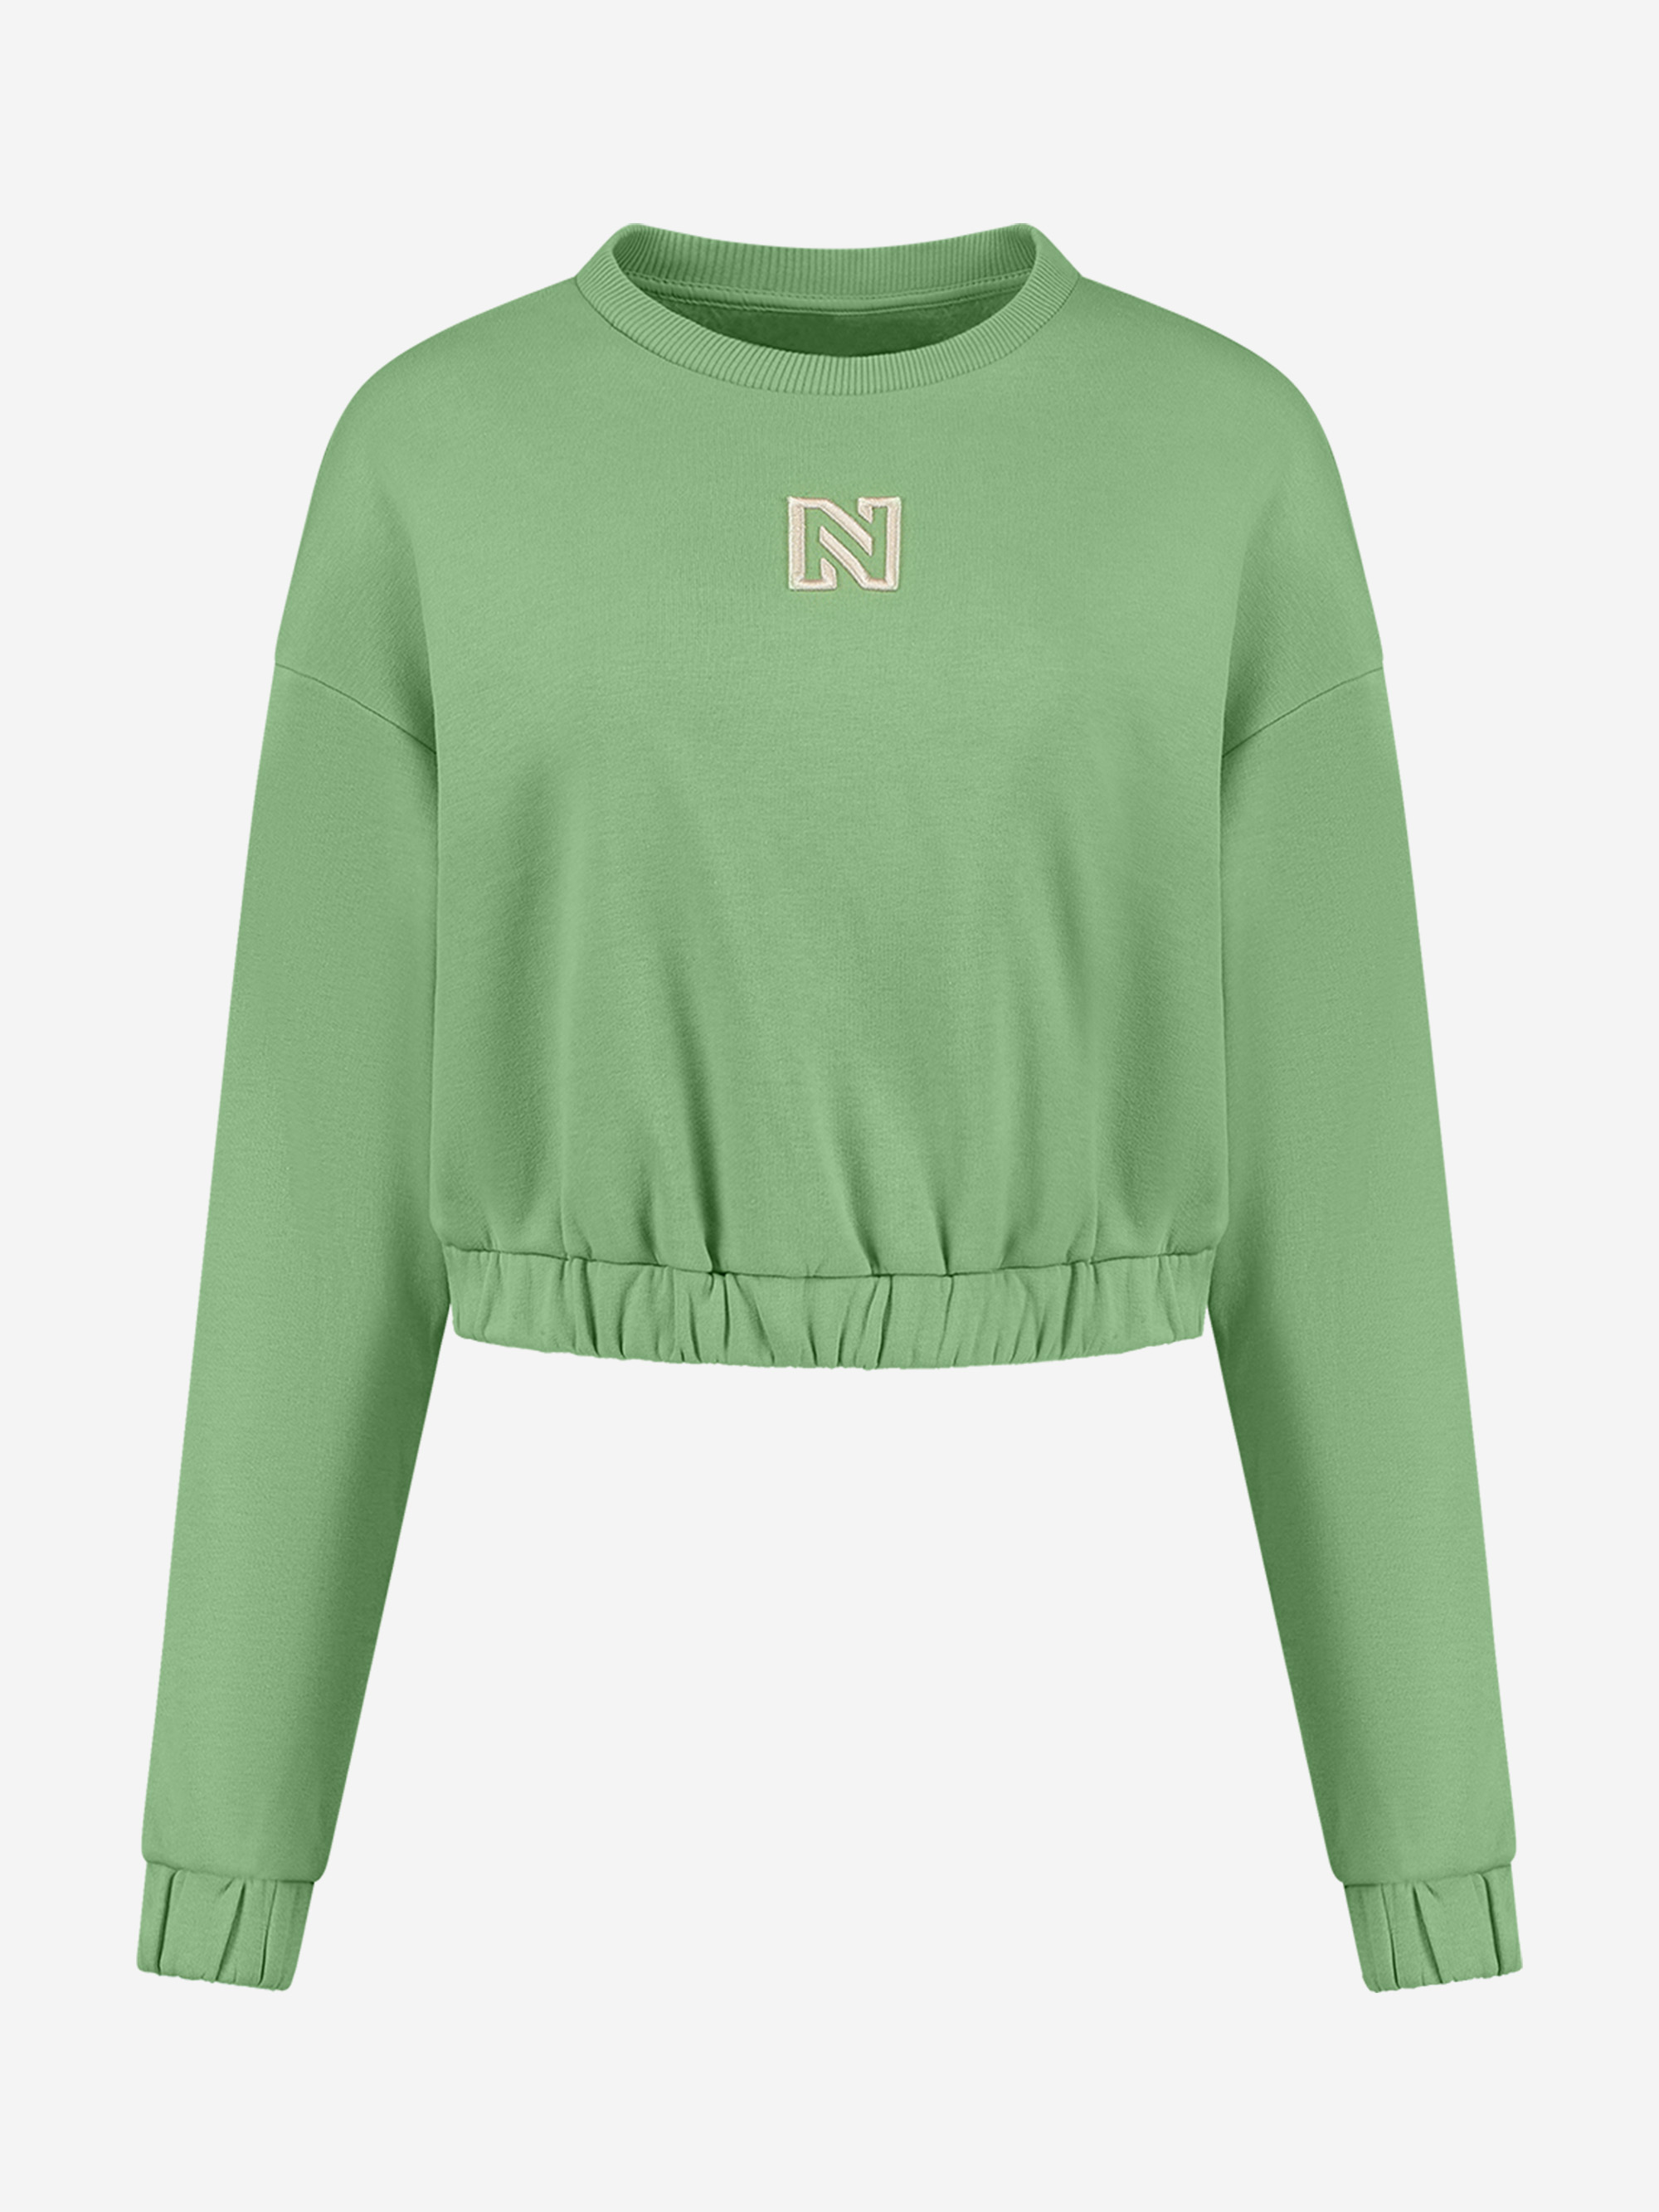 Cropped Sweater with N